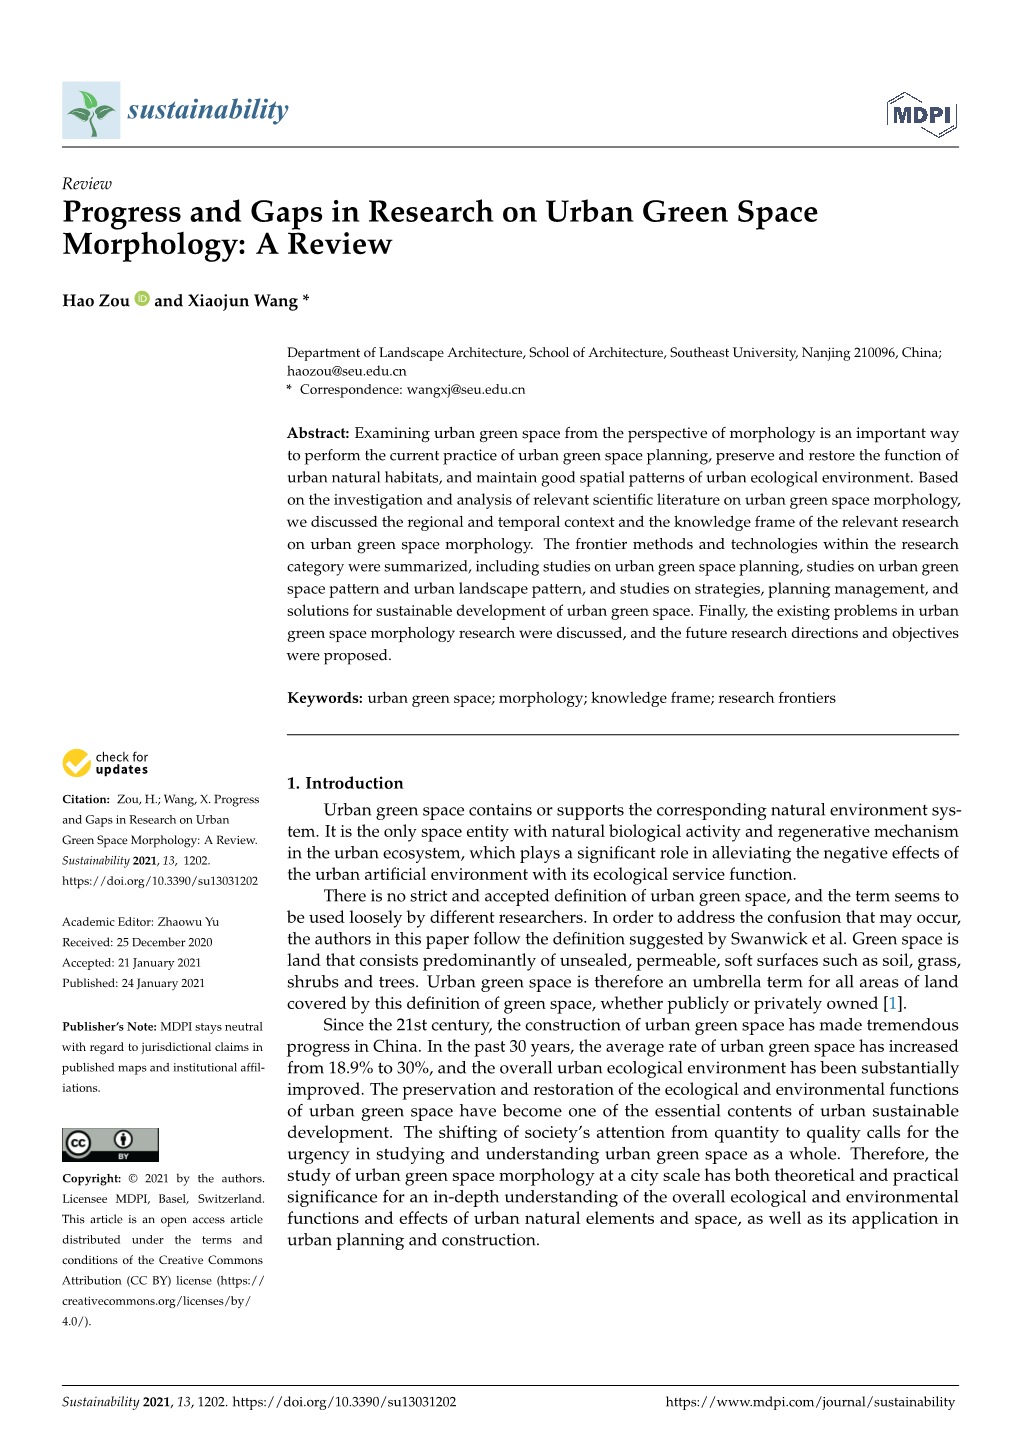 Progress and Gaps in Research on Urban Green Space Morphology: a Review